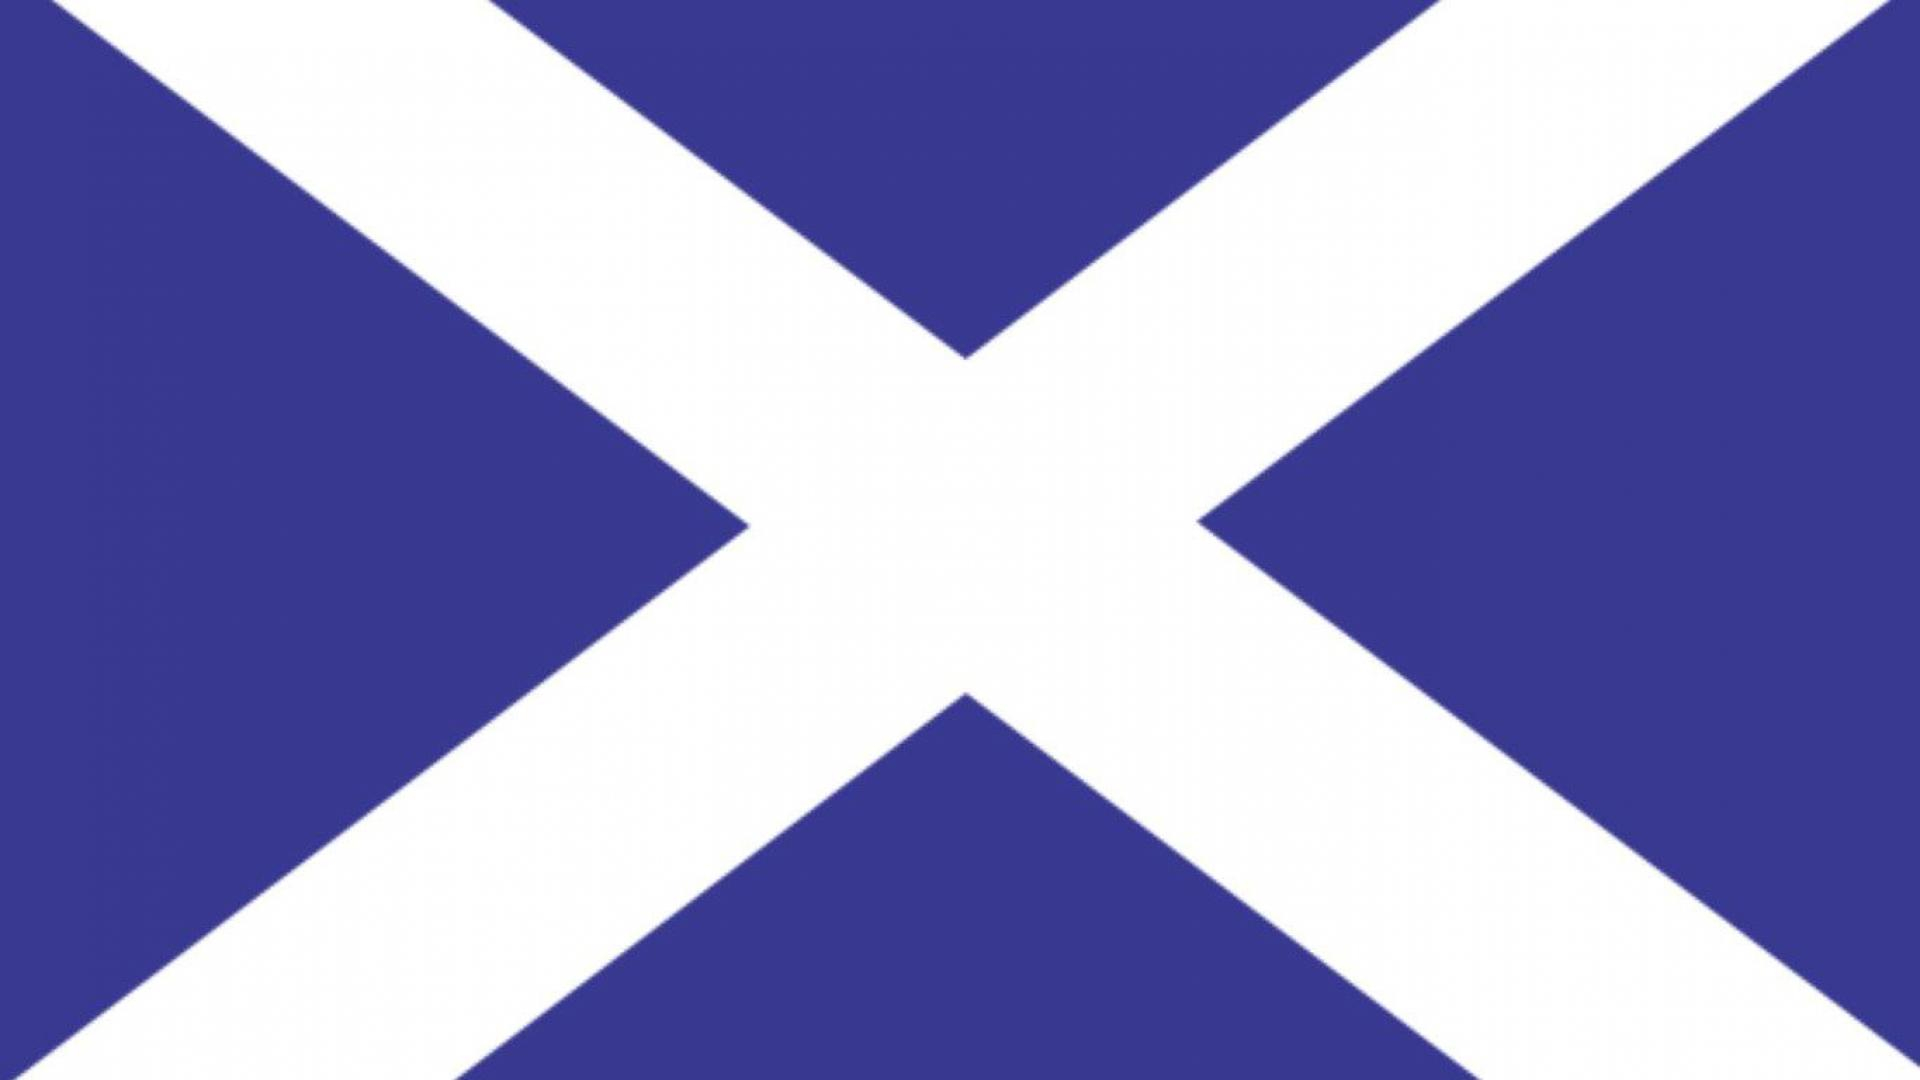 1920x1080 Free download Scottish flag 98073 High Quality and Resolution Wallpapers on [] for your Desktop, Mobile \u0026 Tablet | Explore 74+ Scottish Flag Wallpaper | Scottish Wallpapers and Screensavers, Scotland Desktop Wallpaper